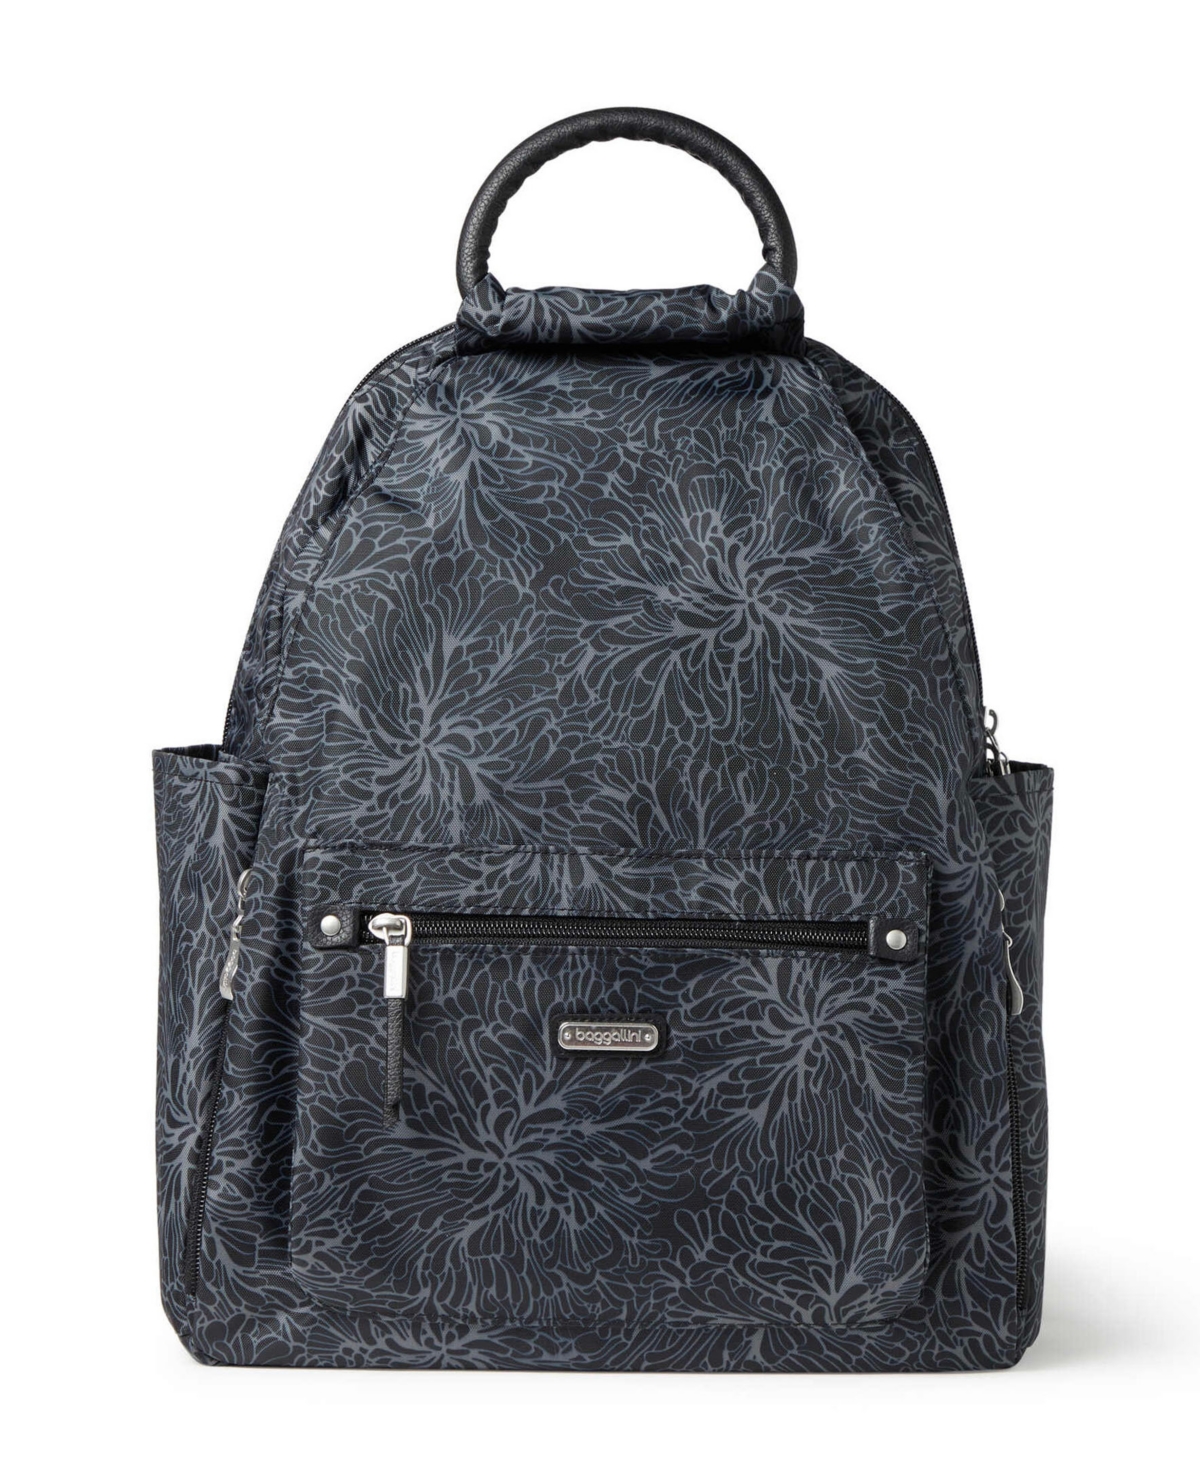 All Day with Wristlet Backpack - Midnight Blossom